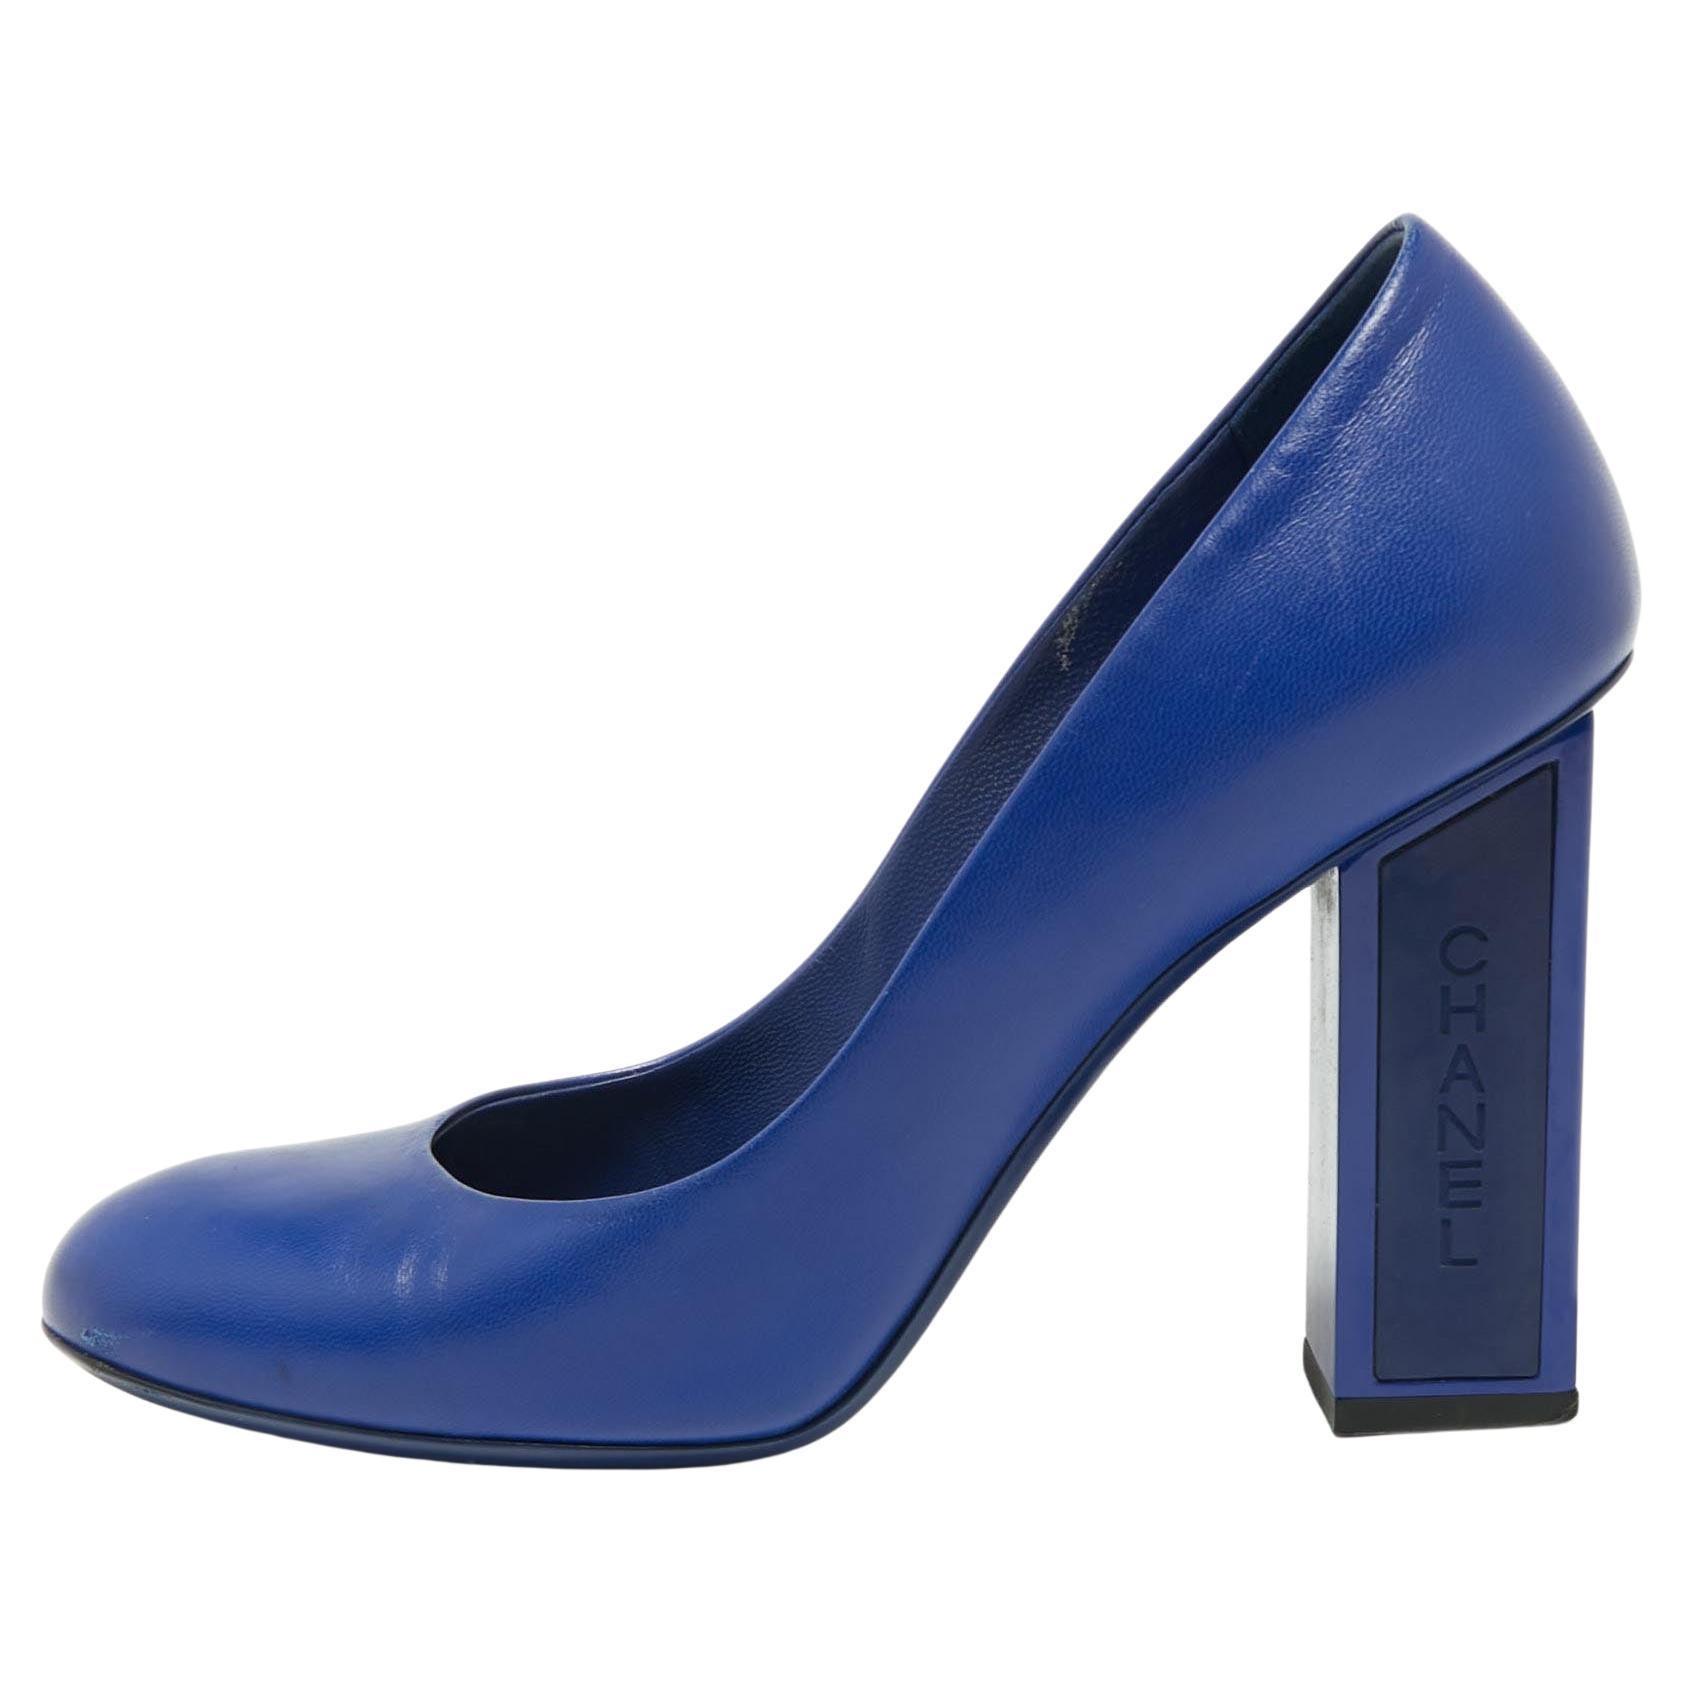 Chanel Blue Leather Round Toe Block Heel Pumps Size 38